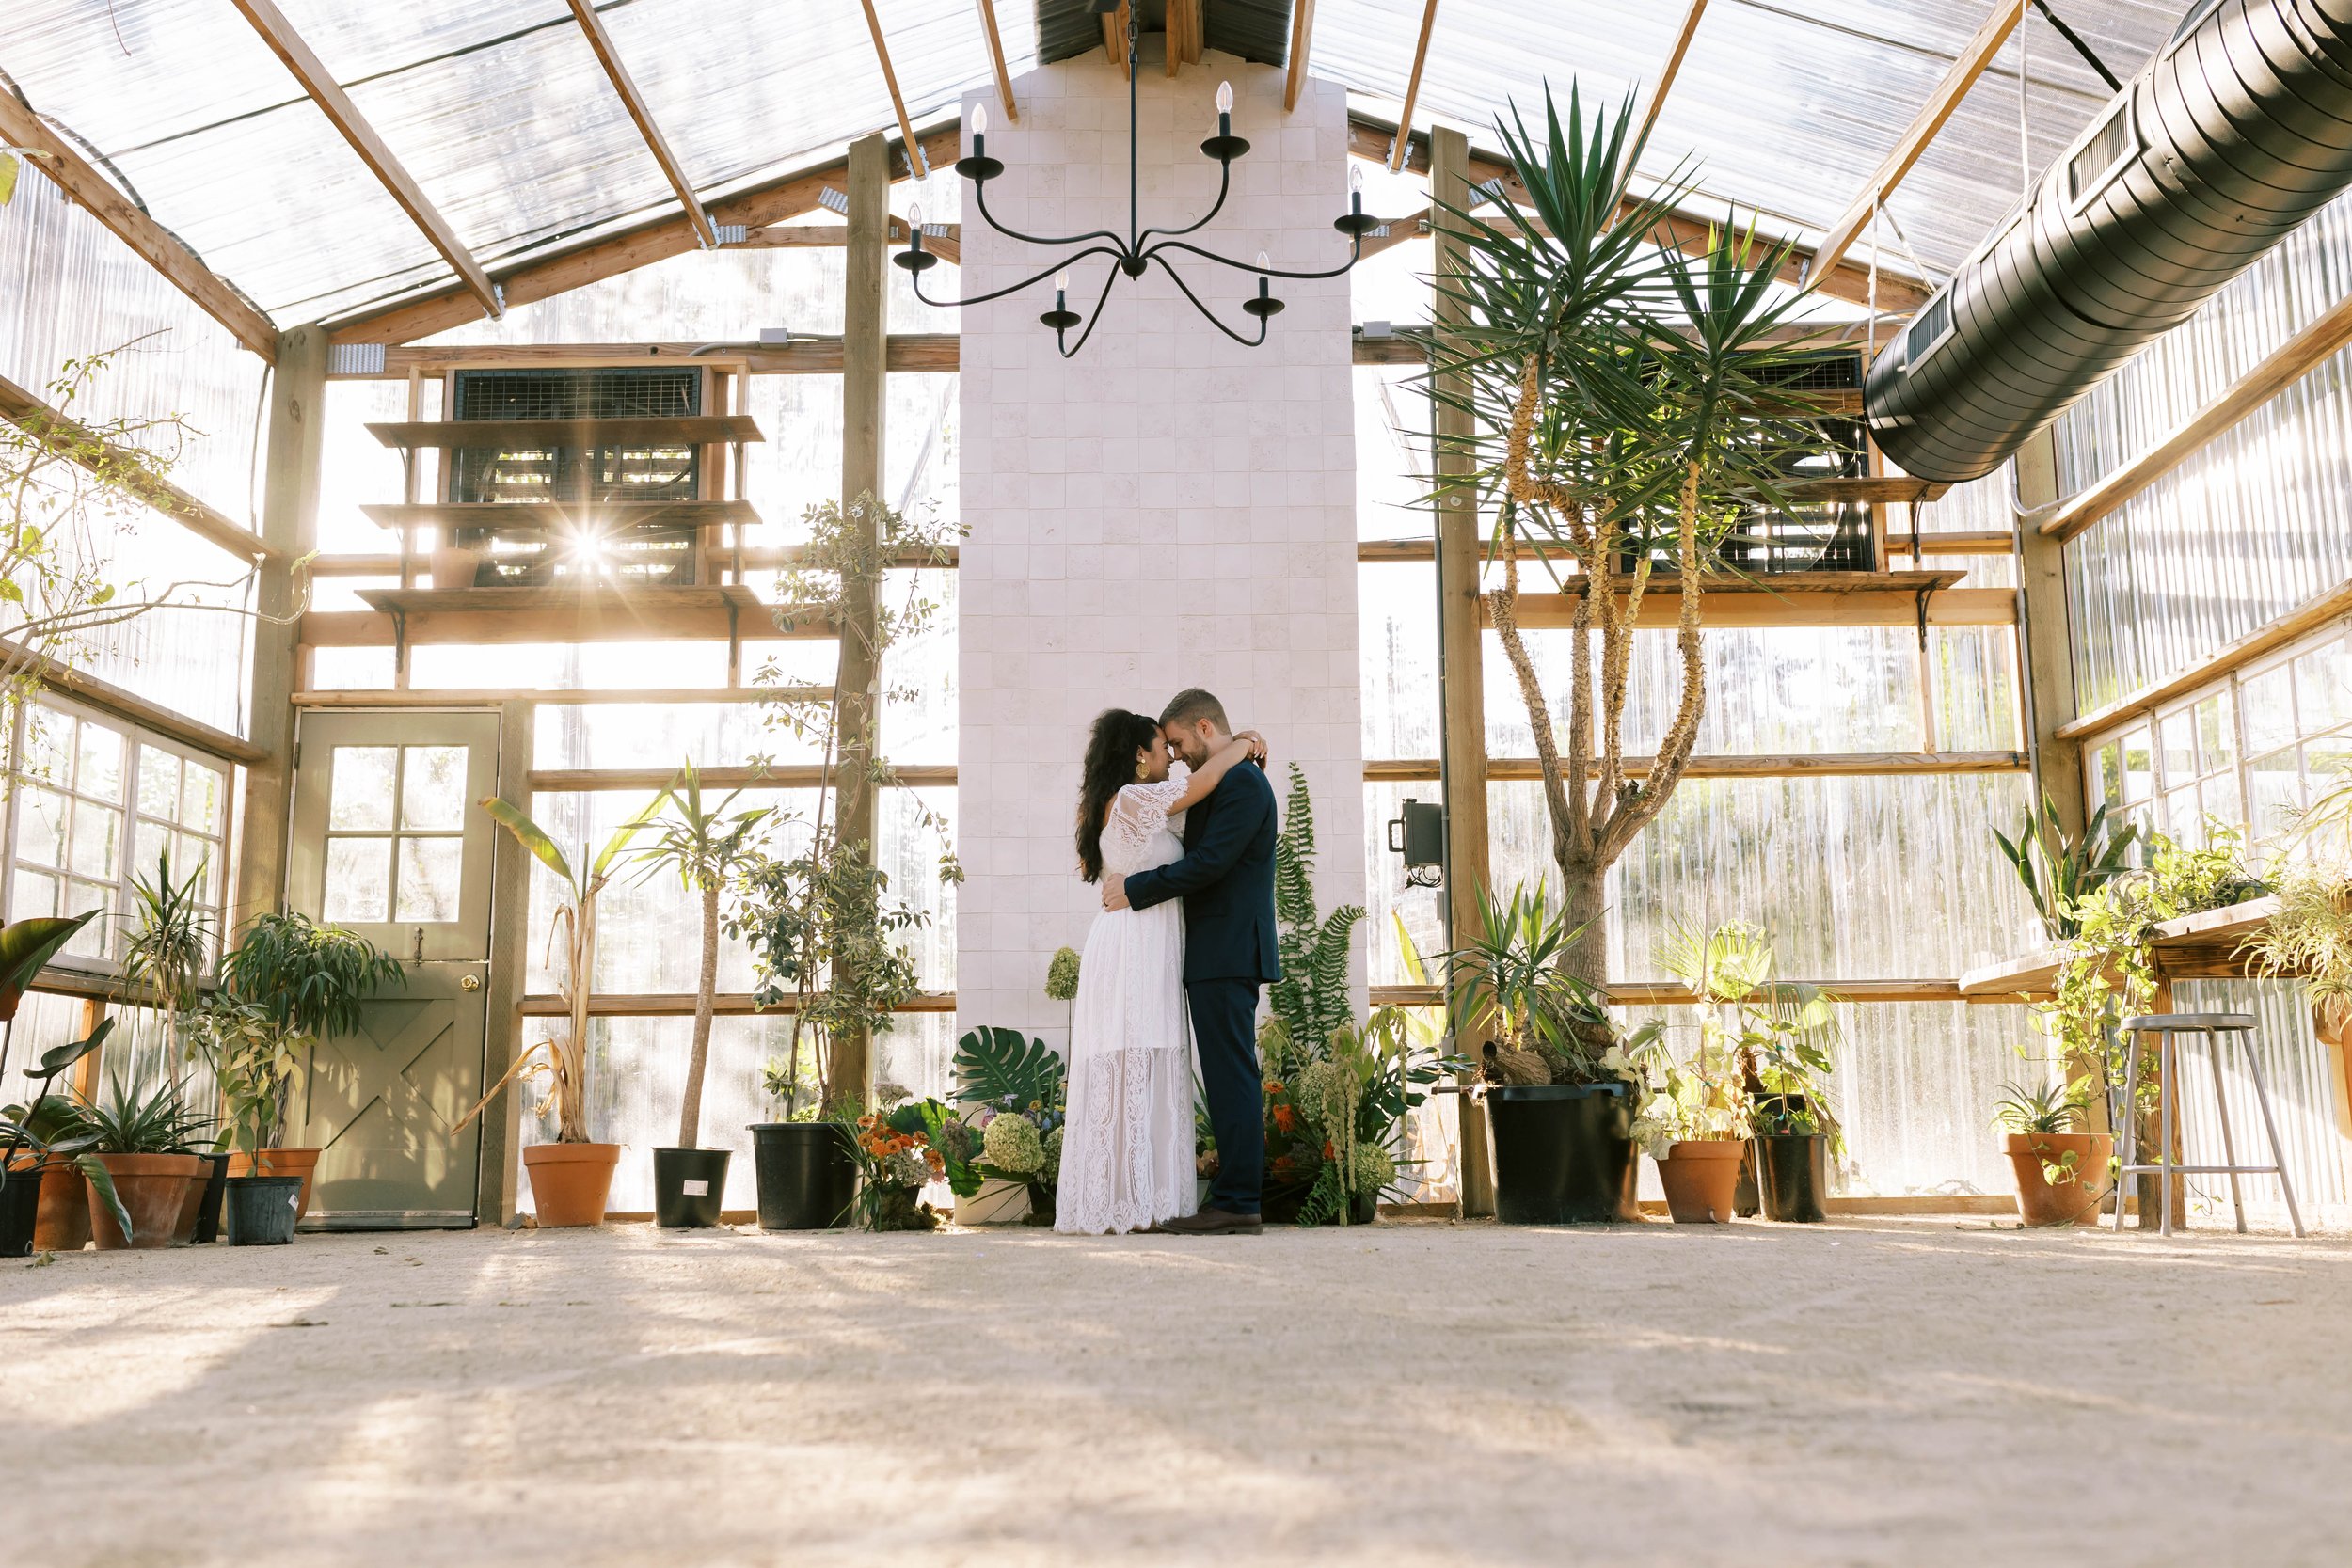 Boho chic modern greenhouse oregon summer wedding, pastels, colorful, romantic, couple standing at alter, sweet moment alone